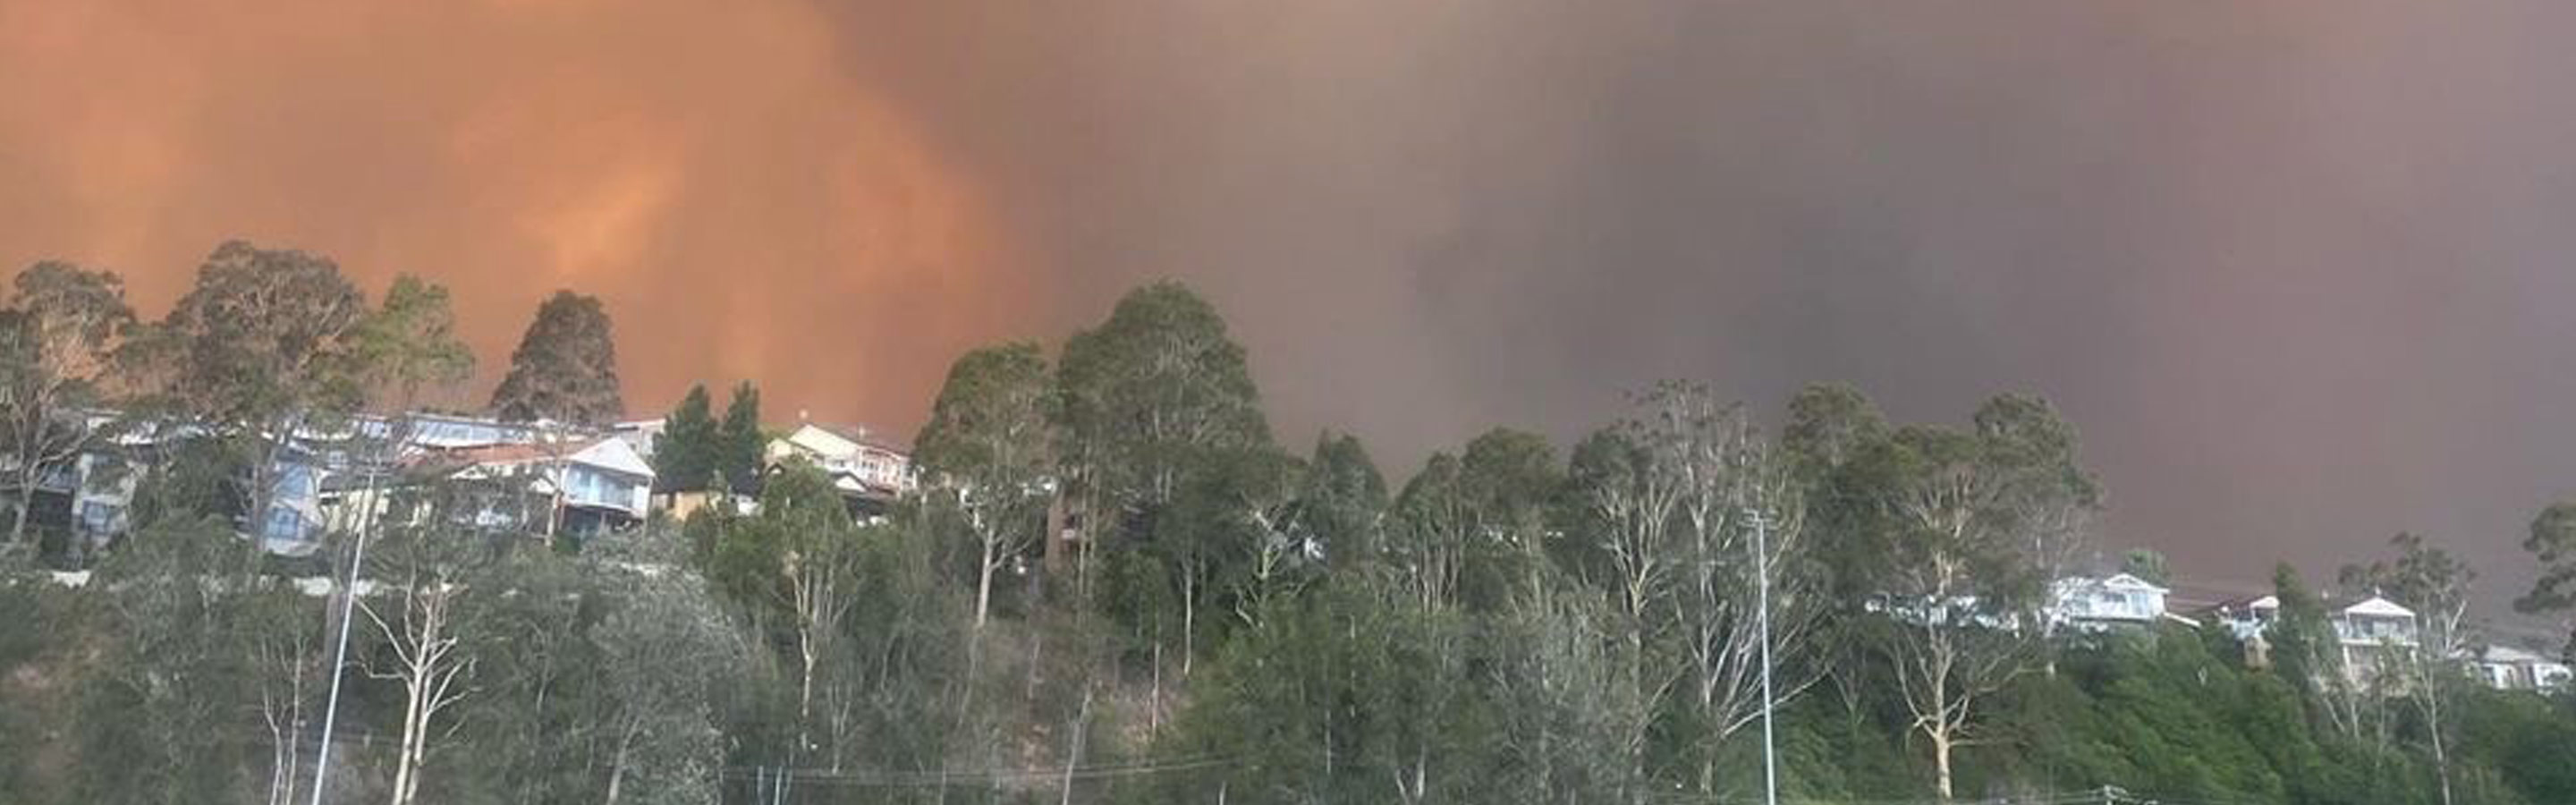 The sky is smoky and orange due to wildfires in Australia.